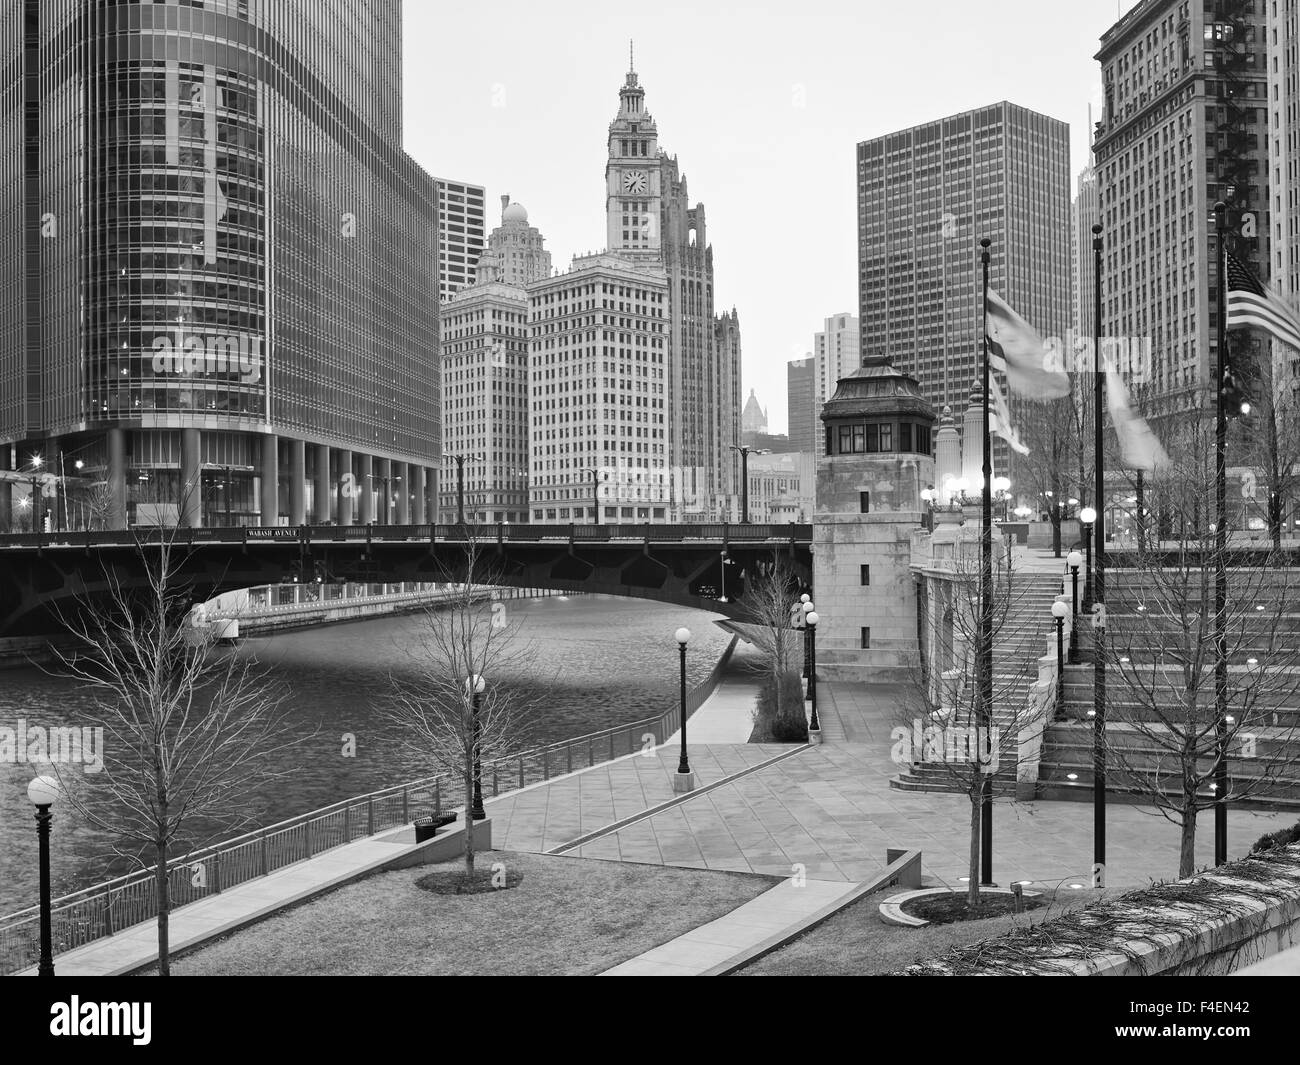 USA, Illinois, Chicago, River walk and Wabash Ave bridge over the river with Chicago Tribune building and Trump tower in the background. Chicago on a cloudy windy day. Stock Photo